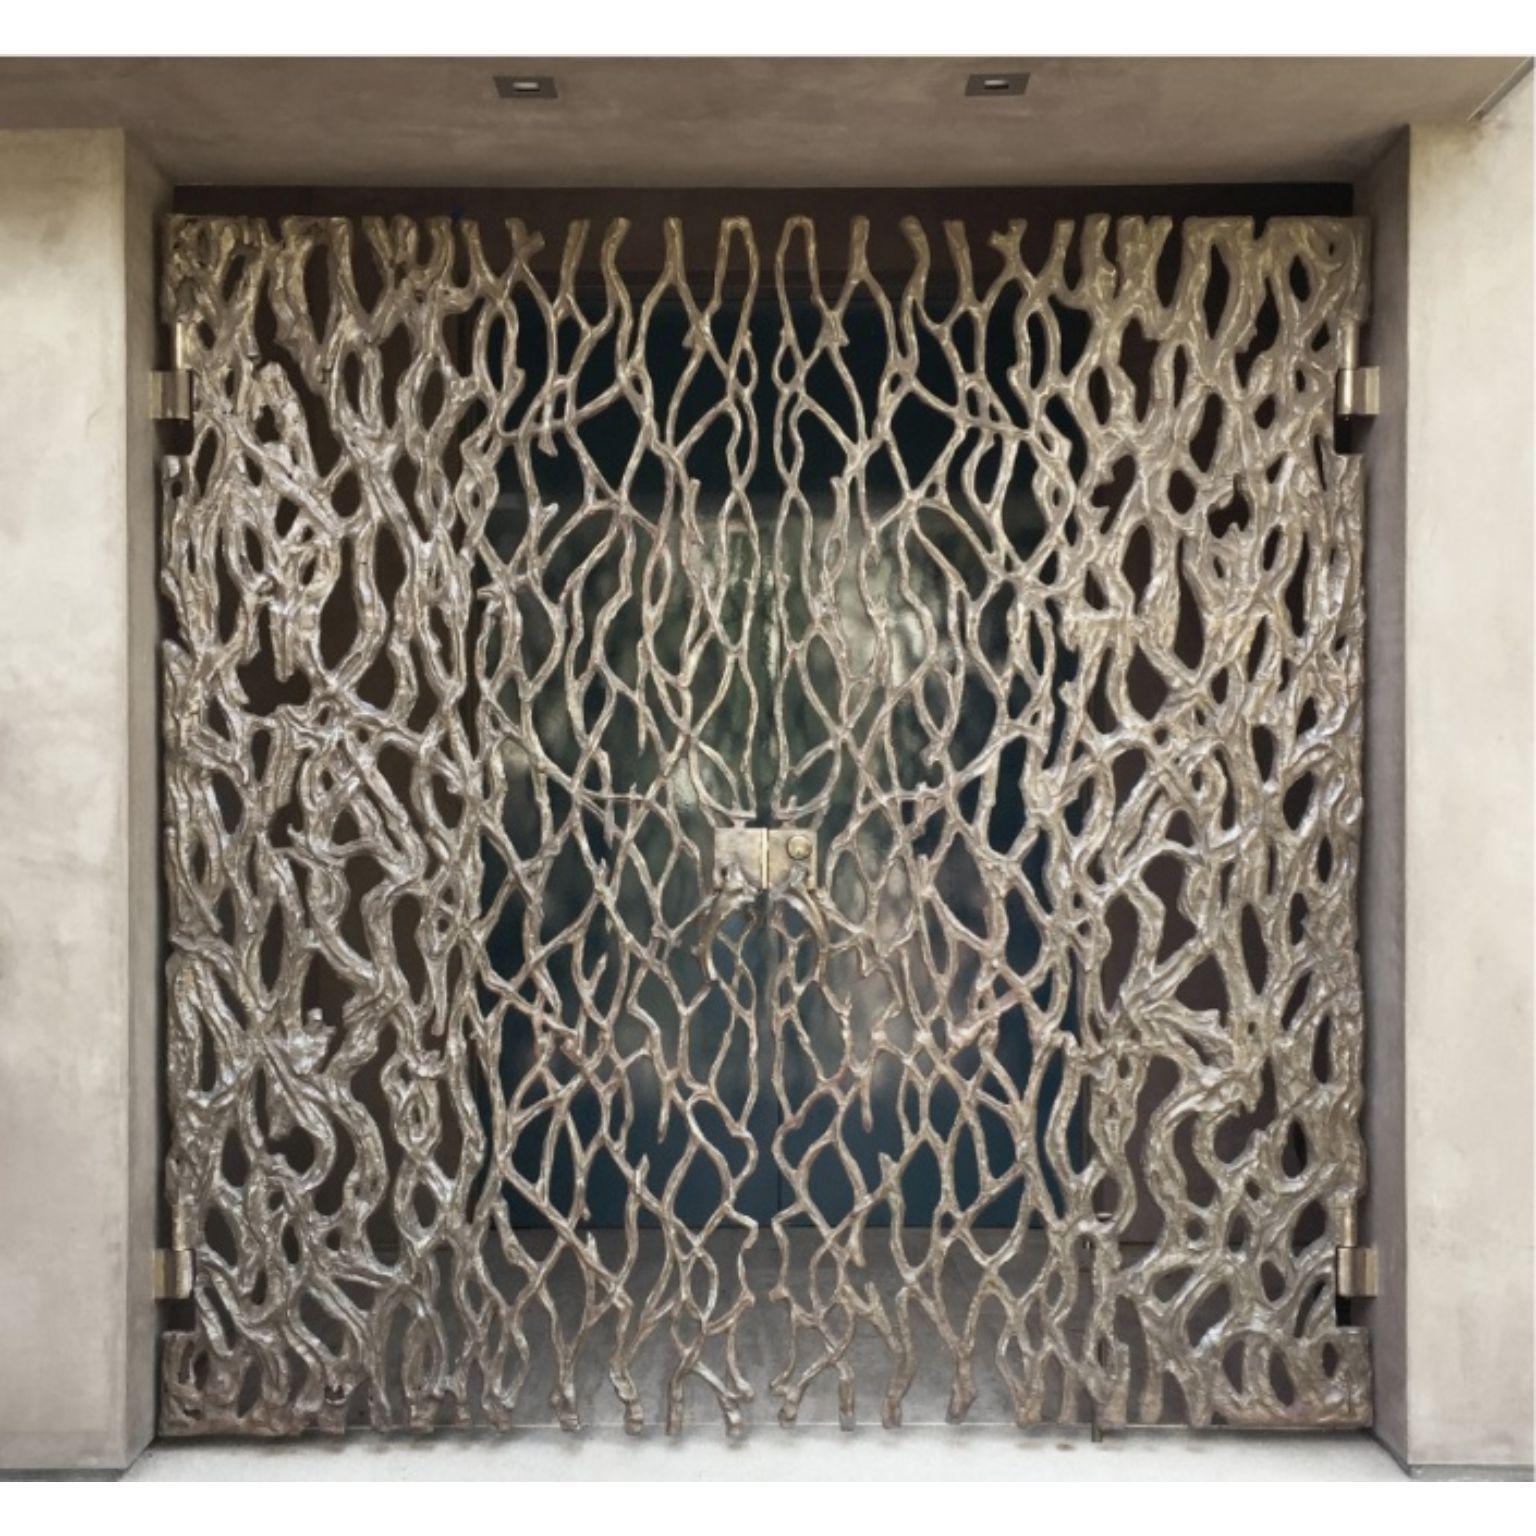 Bronze gates by Mary Brogger
Unique piece.
Dimensions: W 219 x H 219 cm.
Materials: Bronze.
Custom sizes and finishes available.

Mary Brogger is an internationally recognized artist whose diverse practice includes sculpture and